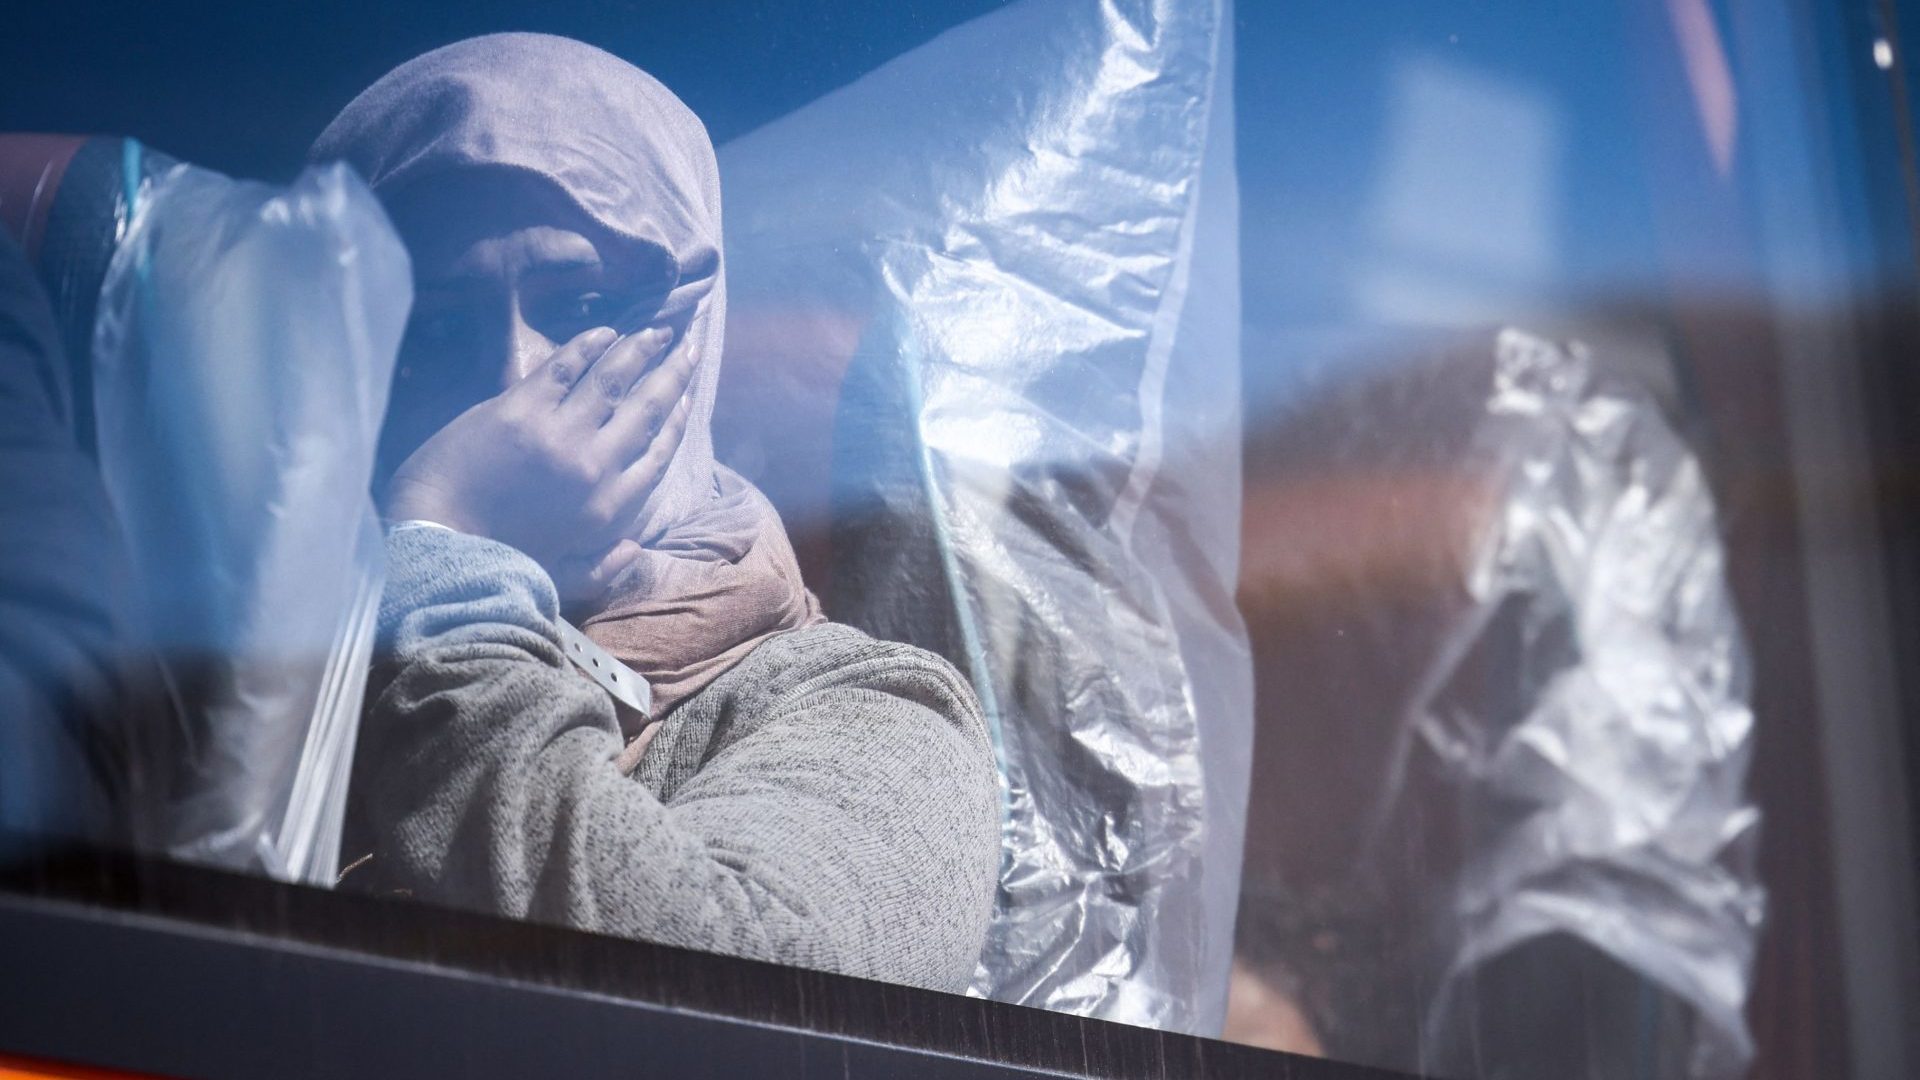 A migrant woman looks out from the window of a bus that will take her and other migrants for processing, in Dungeness. Photo: HENRY NICHOLLS/AFP via Getty Images